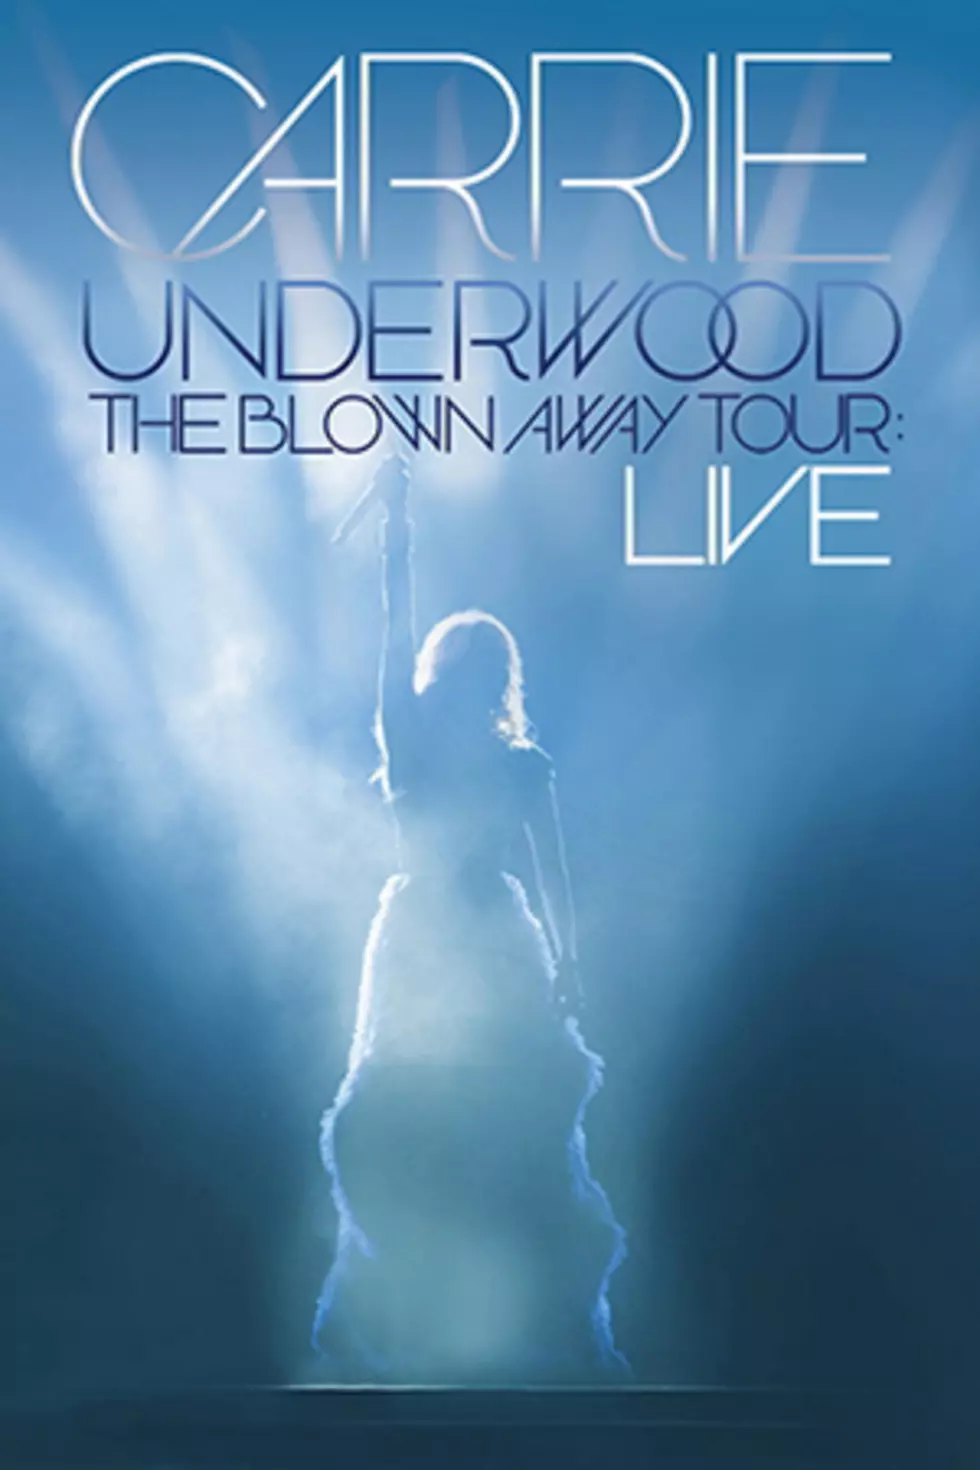 Carrie Underwood Reveals Cover Art, Track Listing for Upcoming Live DVD